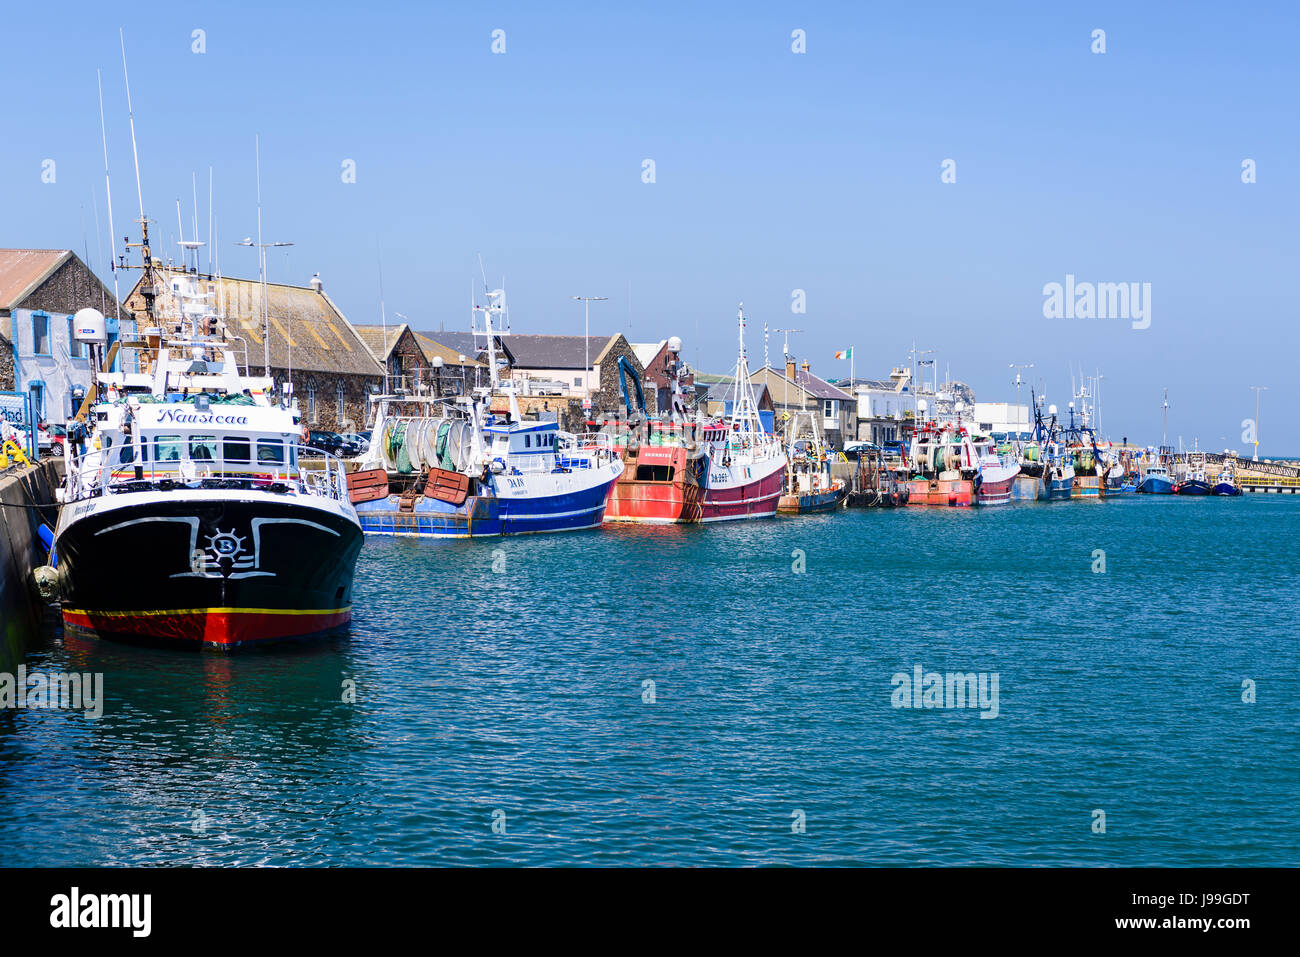 Trawlers berthed in Howth Harbour, Dublin, Ireland. Stock Photo